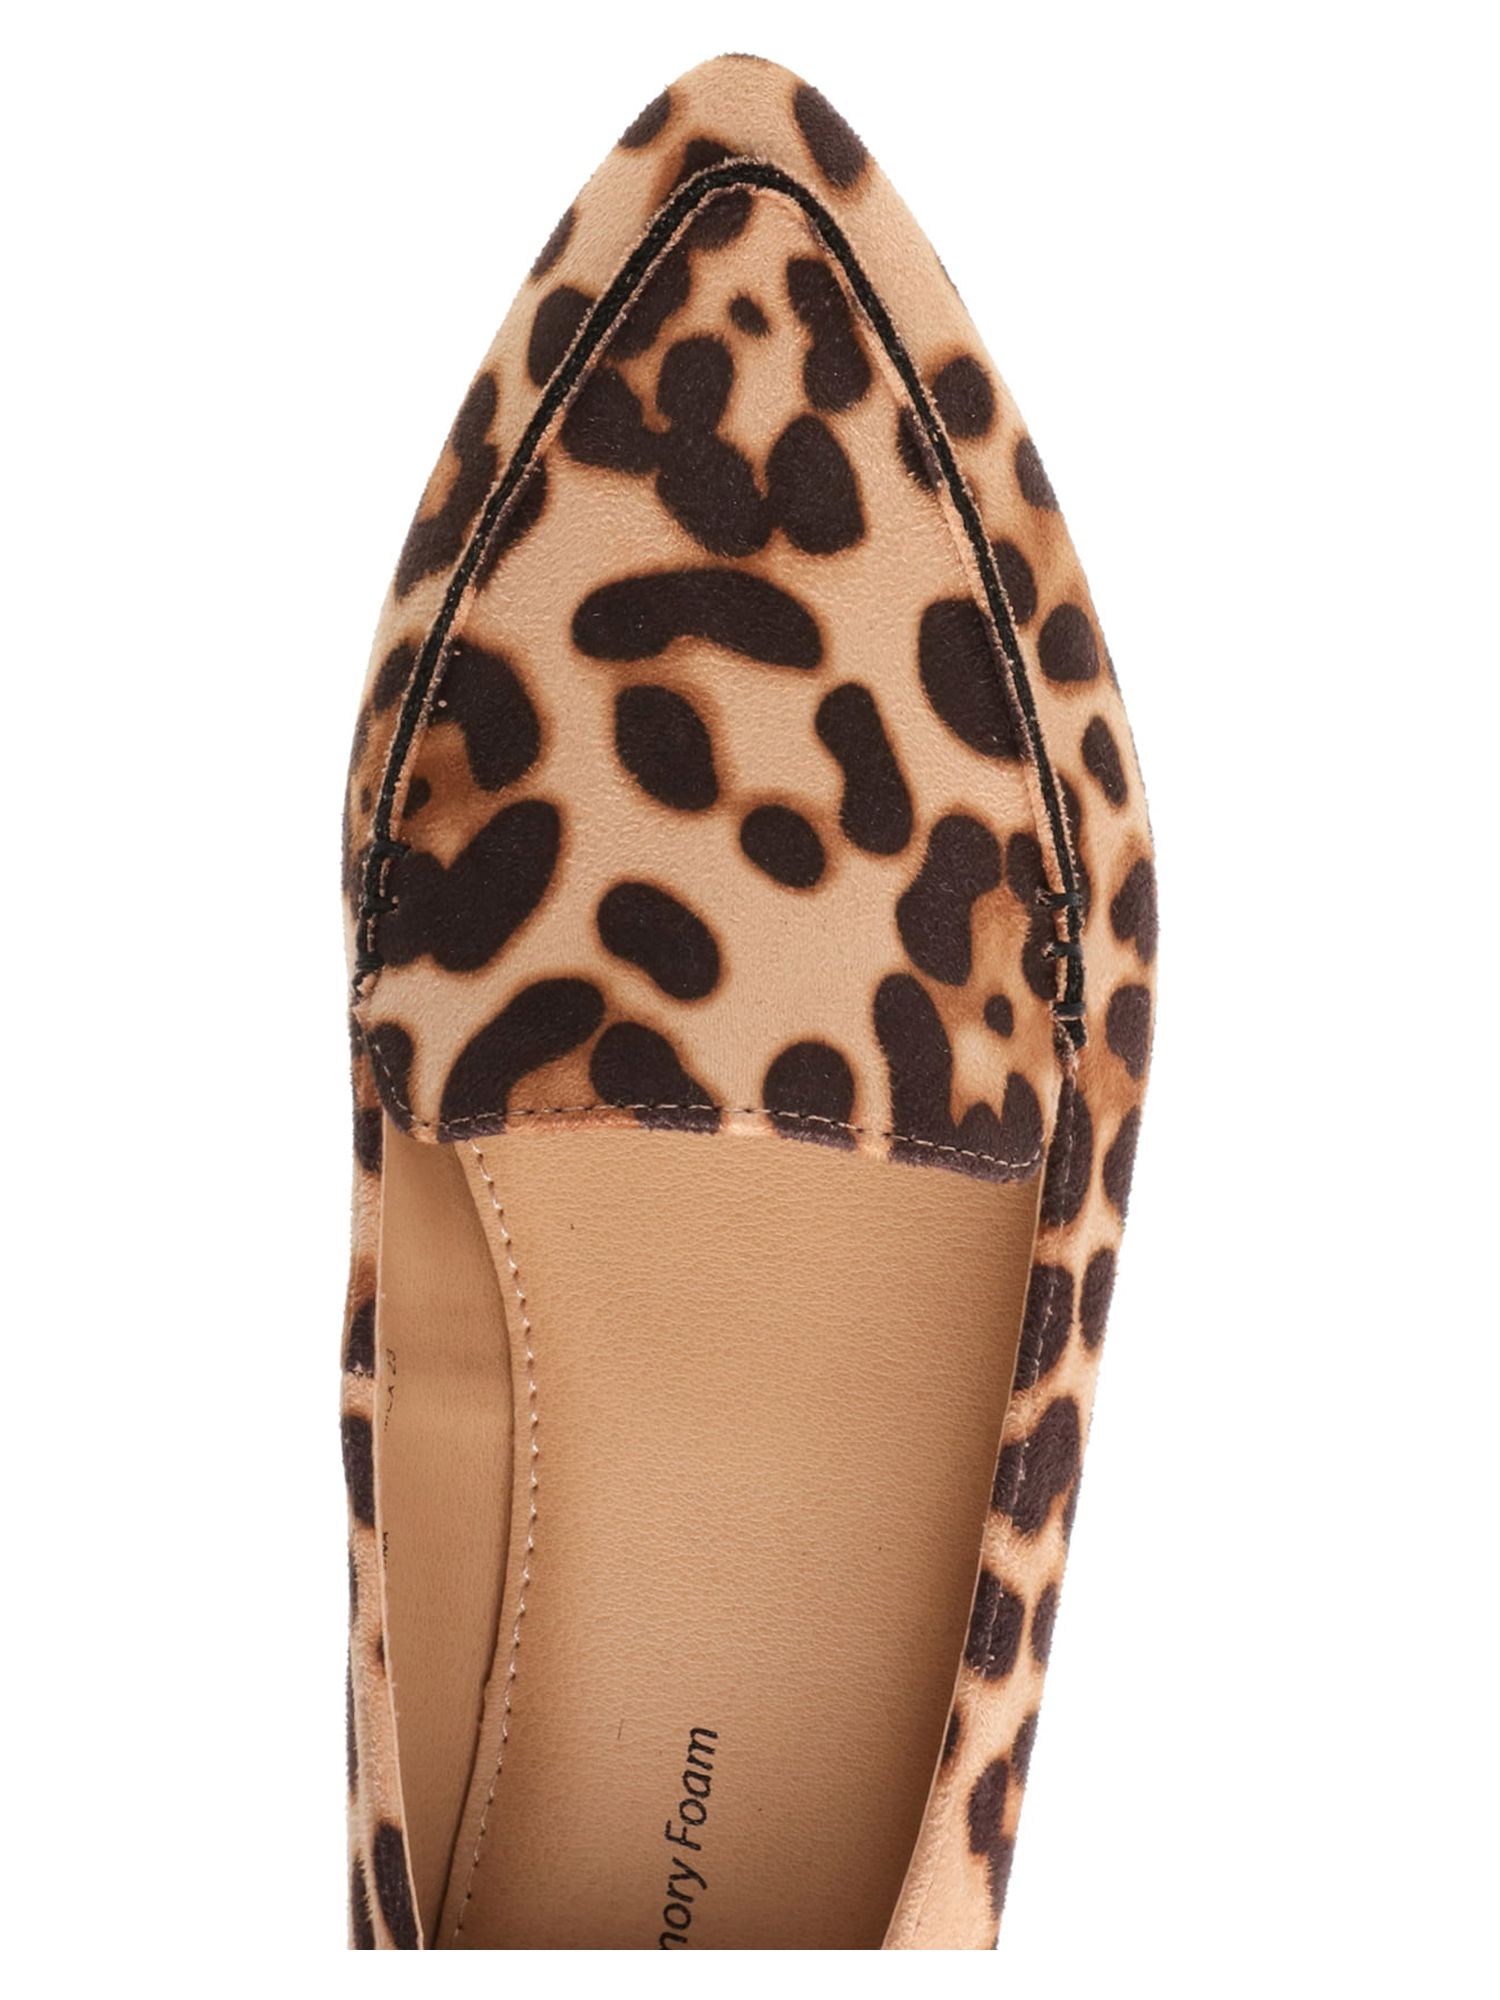 Women's Time and Tru Animal Print Feather Flat - image 4 of 6